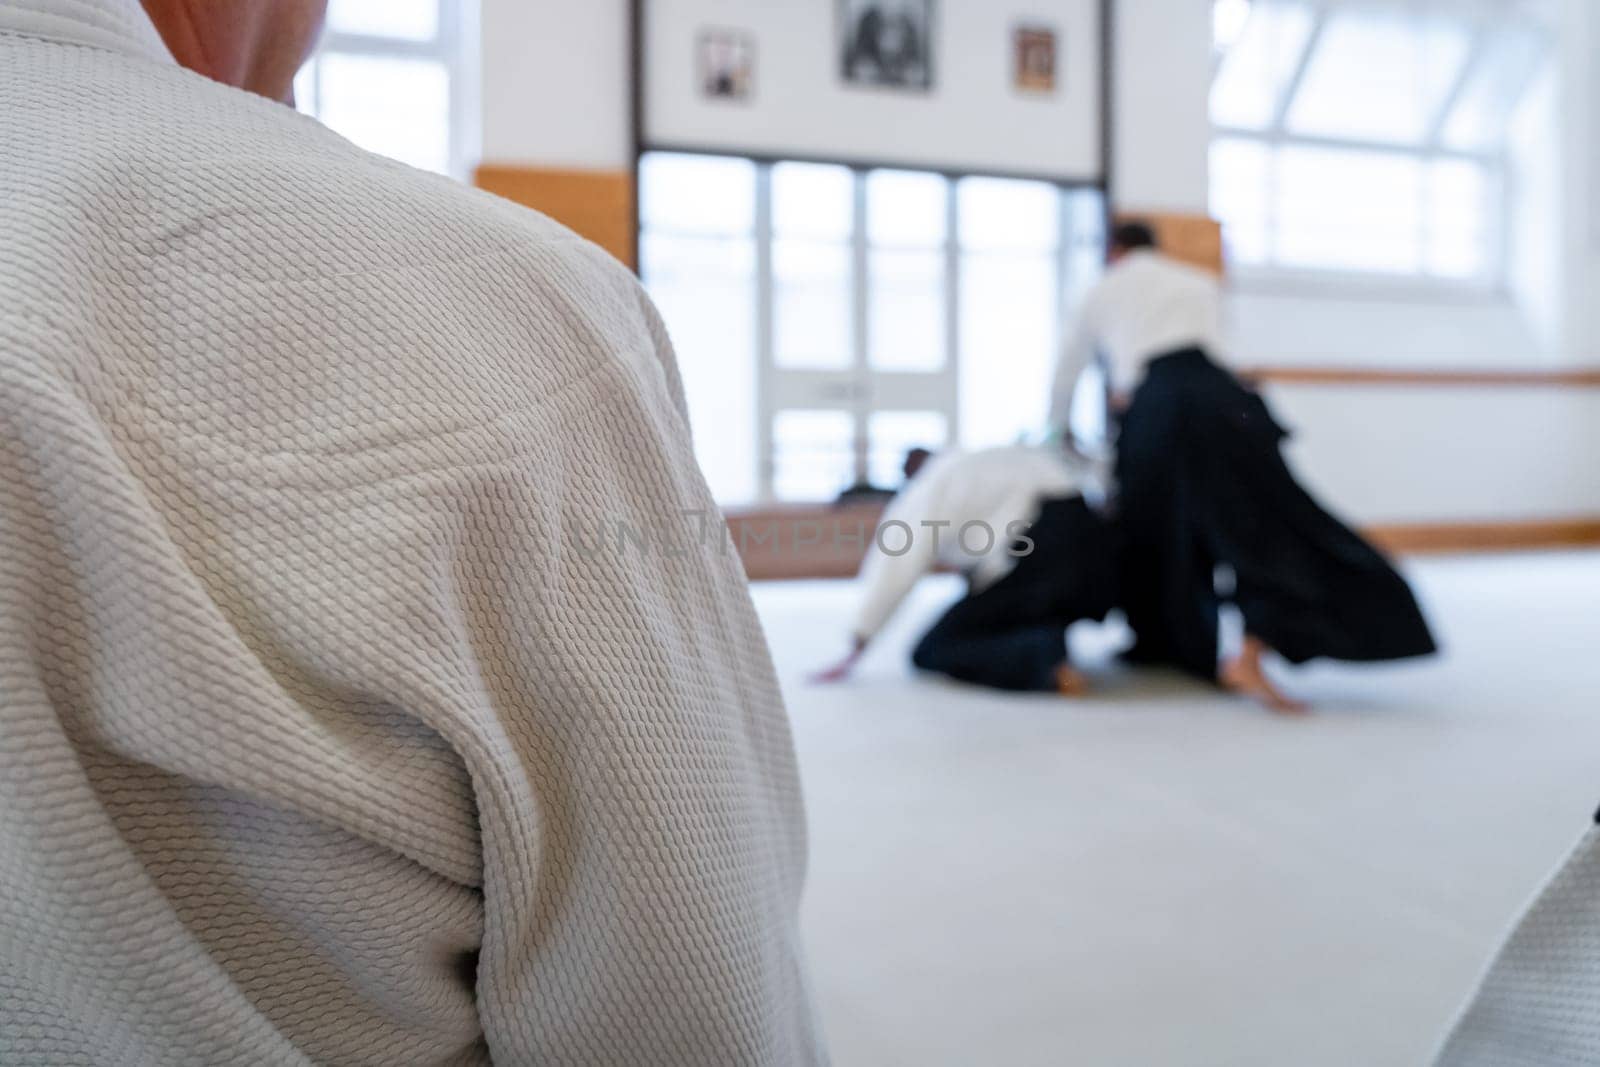 People practicing aikido martial art in a dojo background. Seiza position.